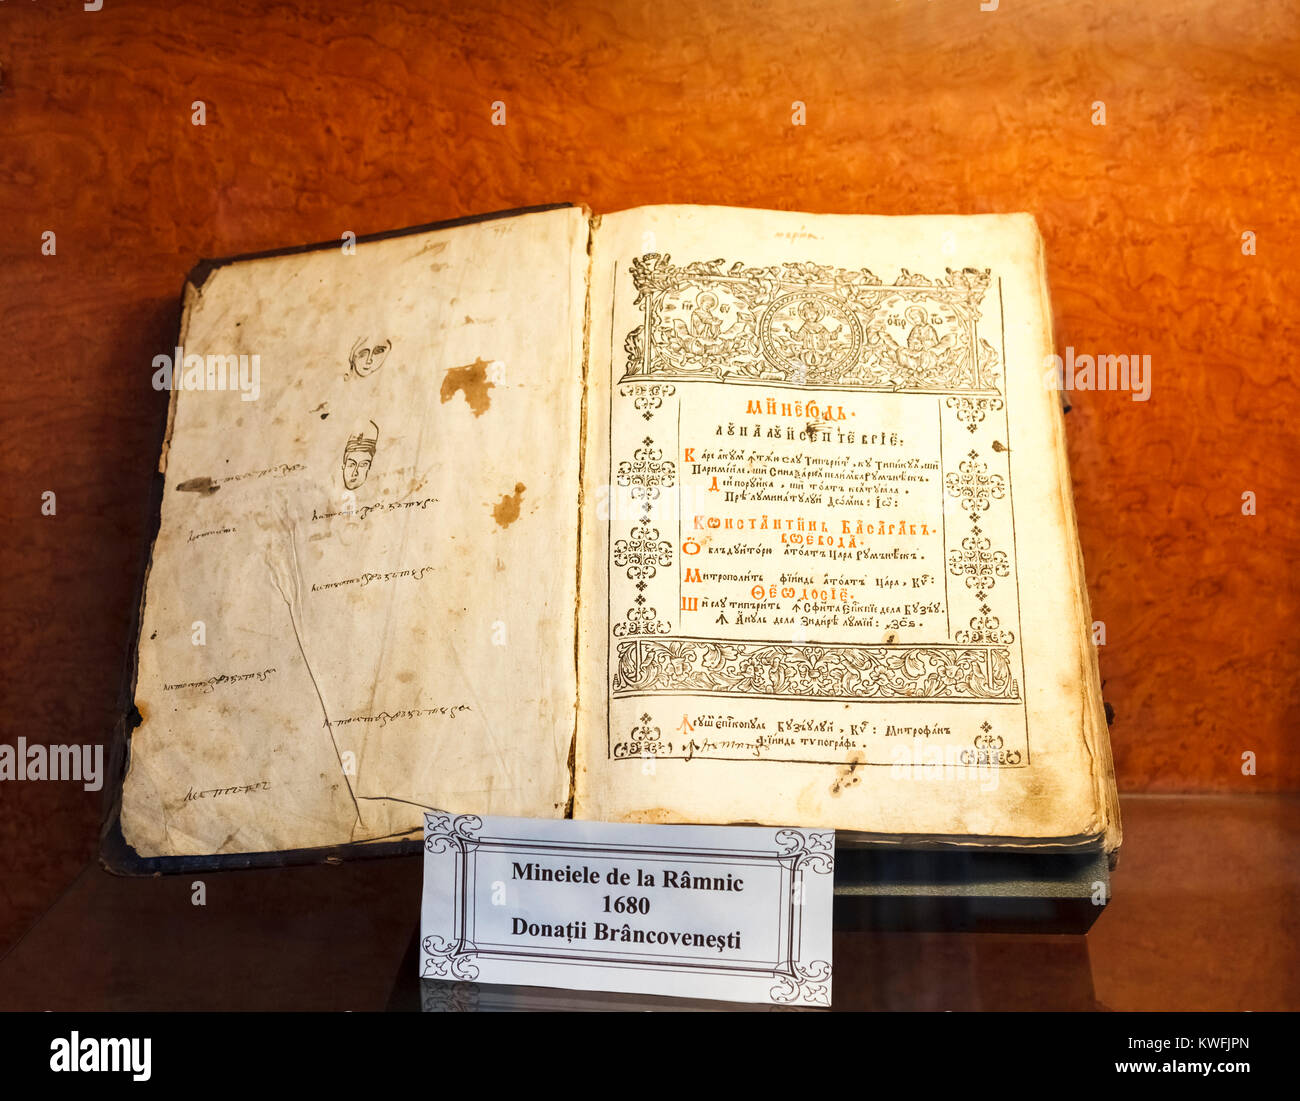 Ancient manuscript book, an exhibit in the First Romanian School Museum, Schei district, Brasov, a city in the central Transylvania region of Romania Stock Photo